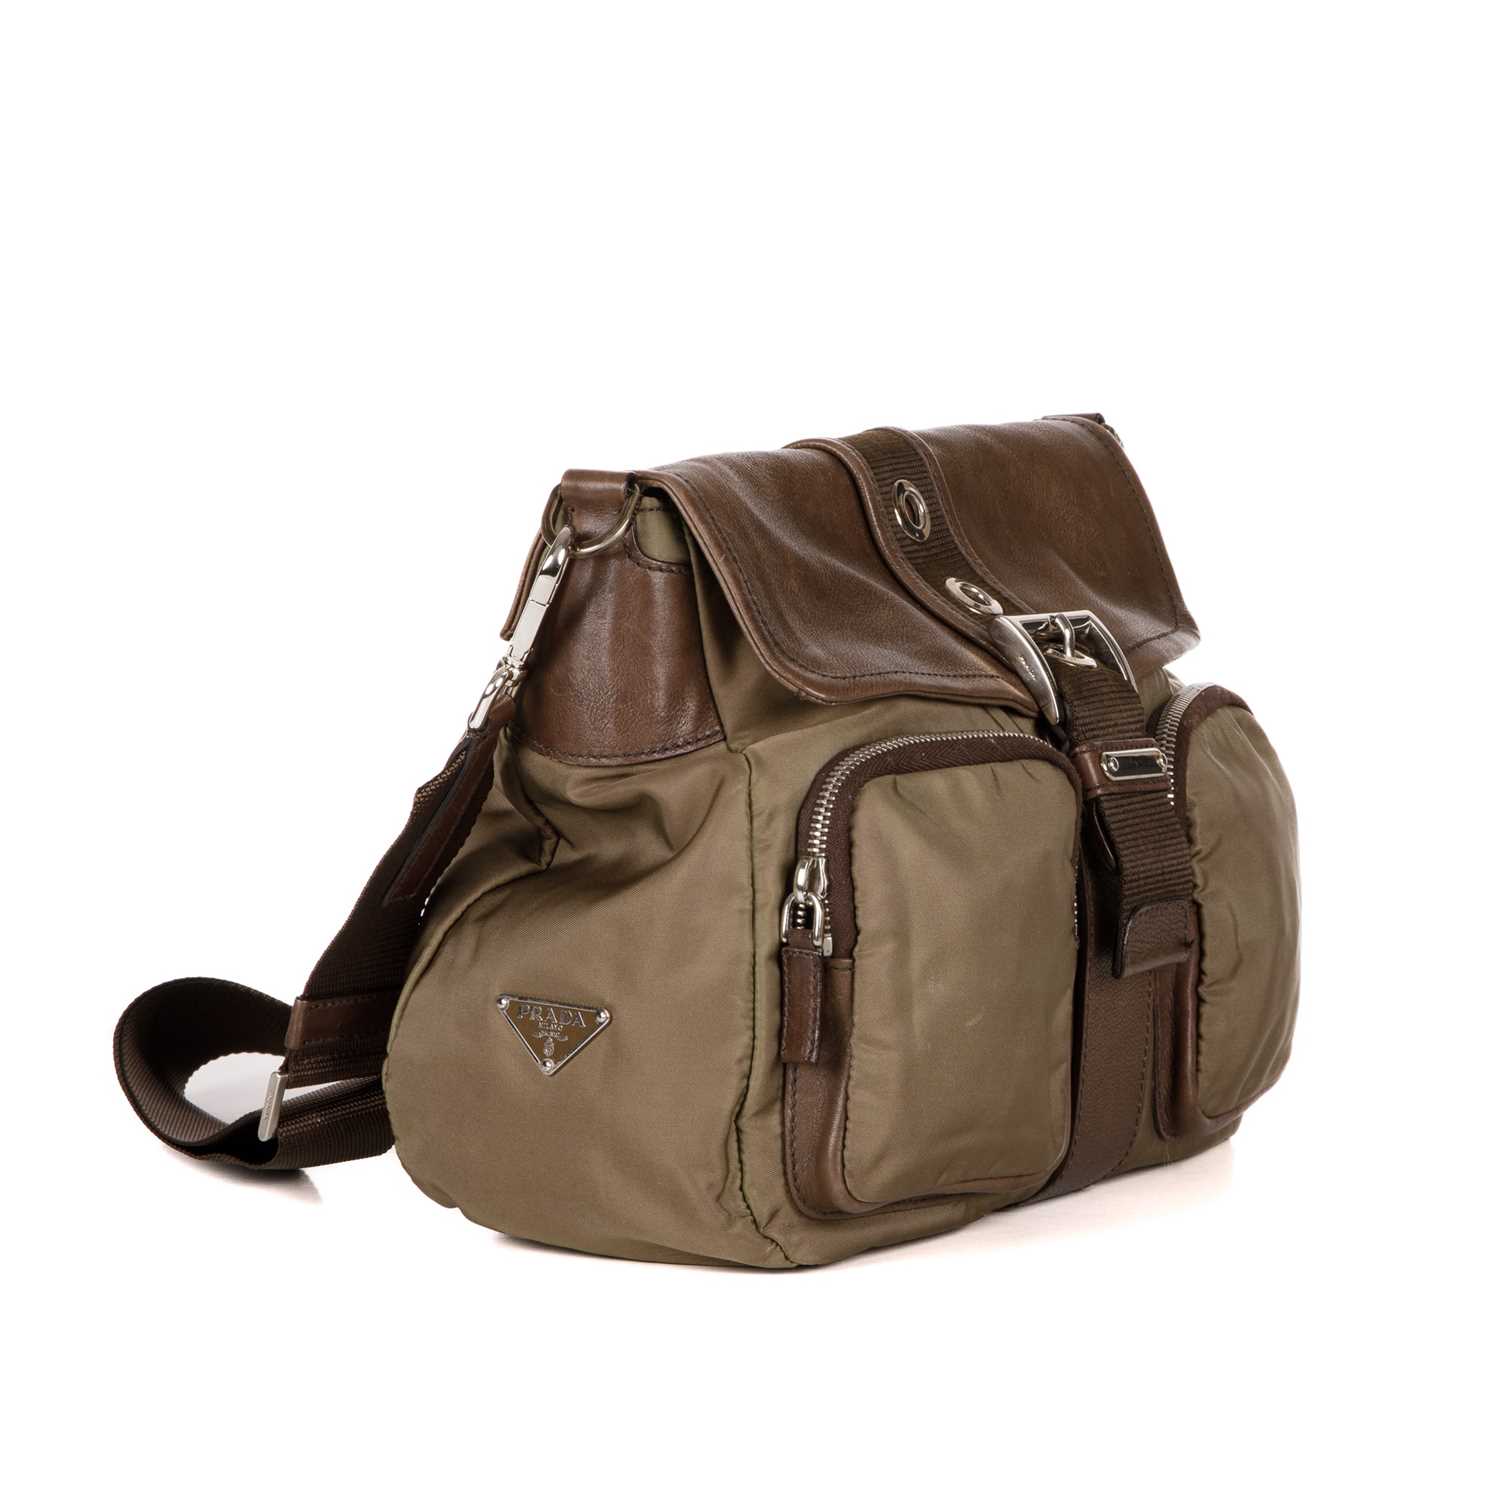 Prada, a crossbody Flap Buckle bag, designed with a khaki green nylon and brown leather exterior, - Image 3 of 4